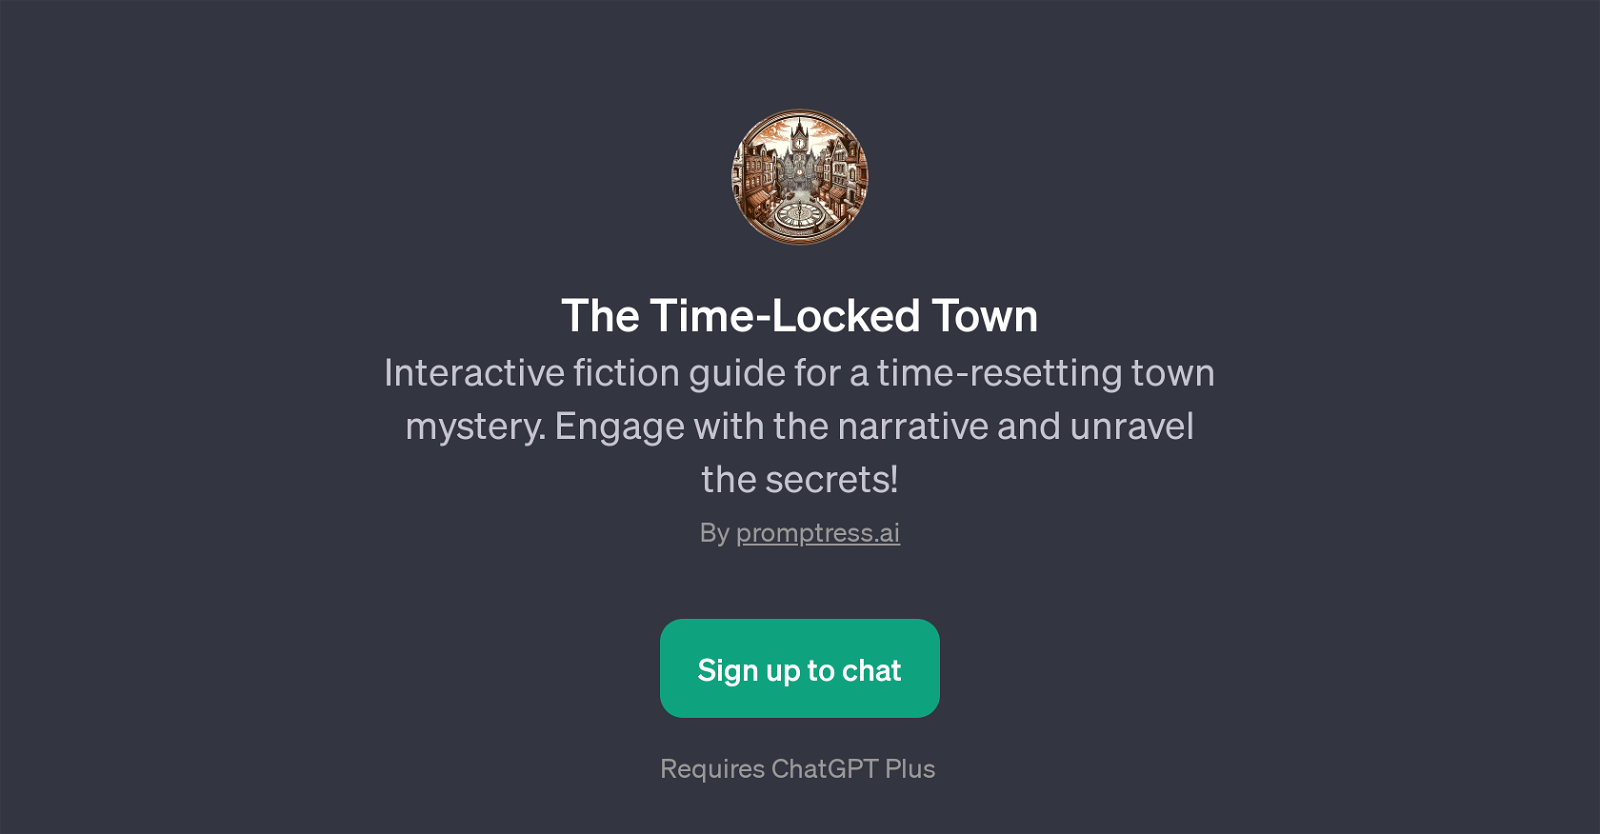 The Time-Locked Town website